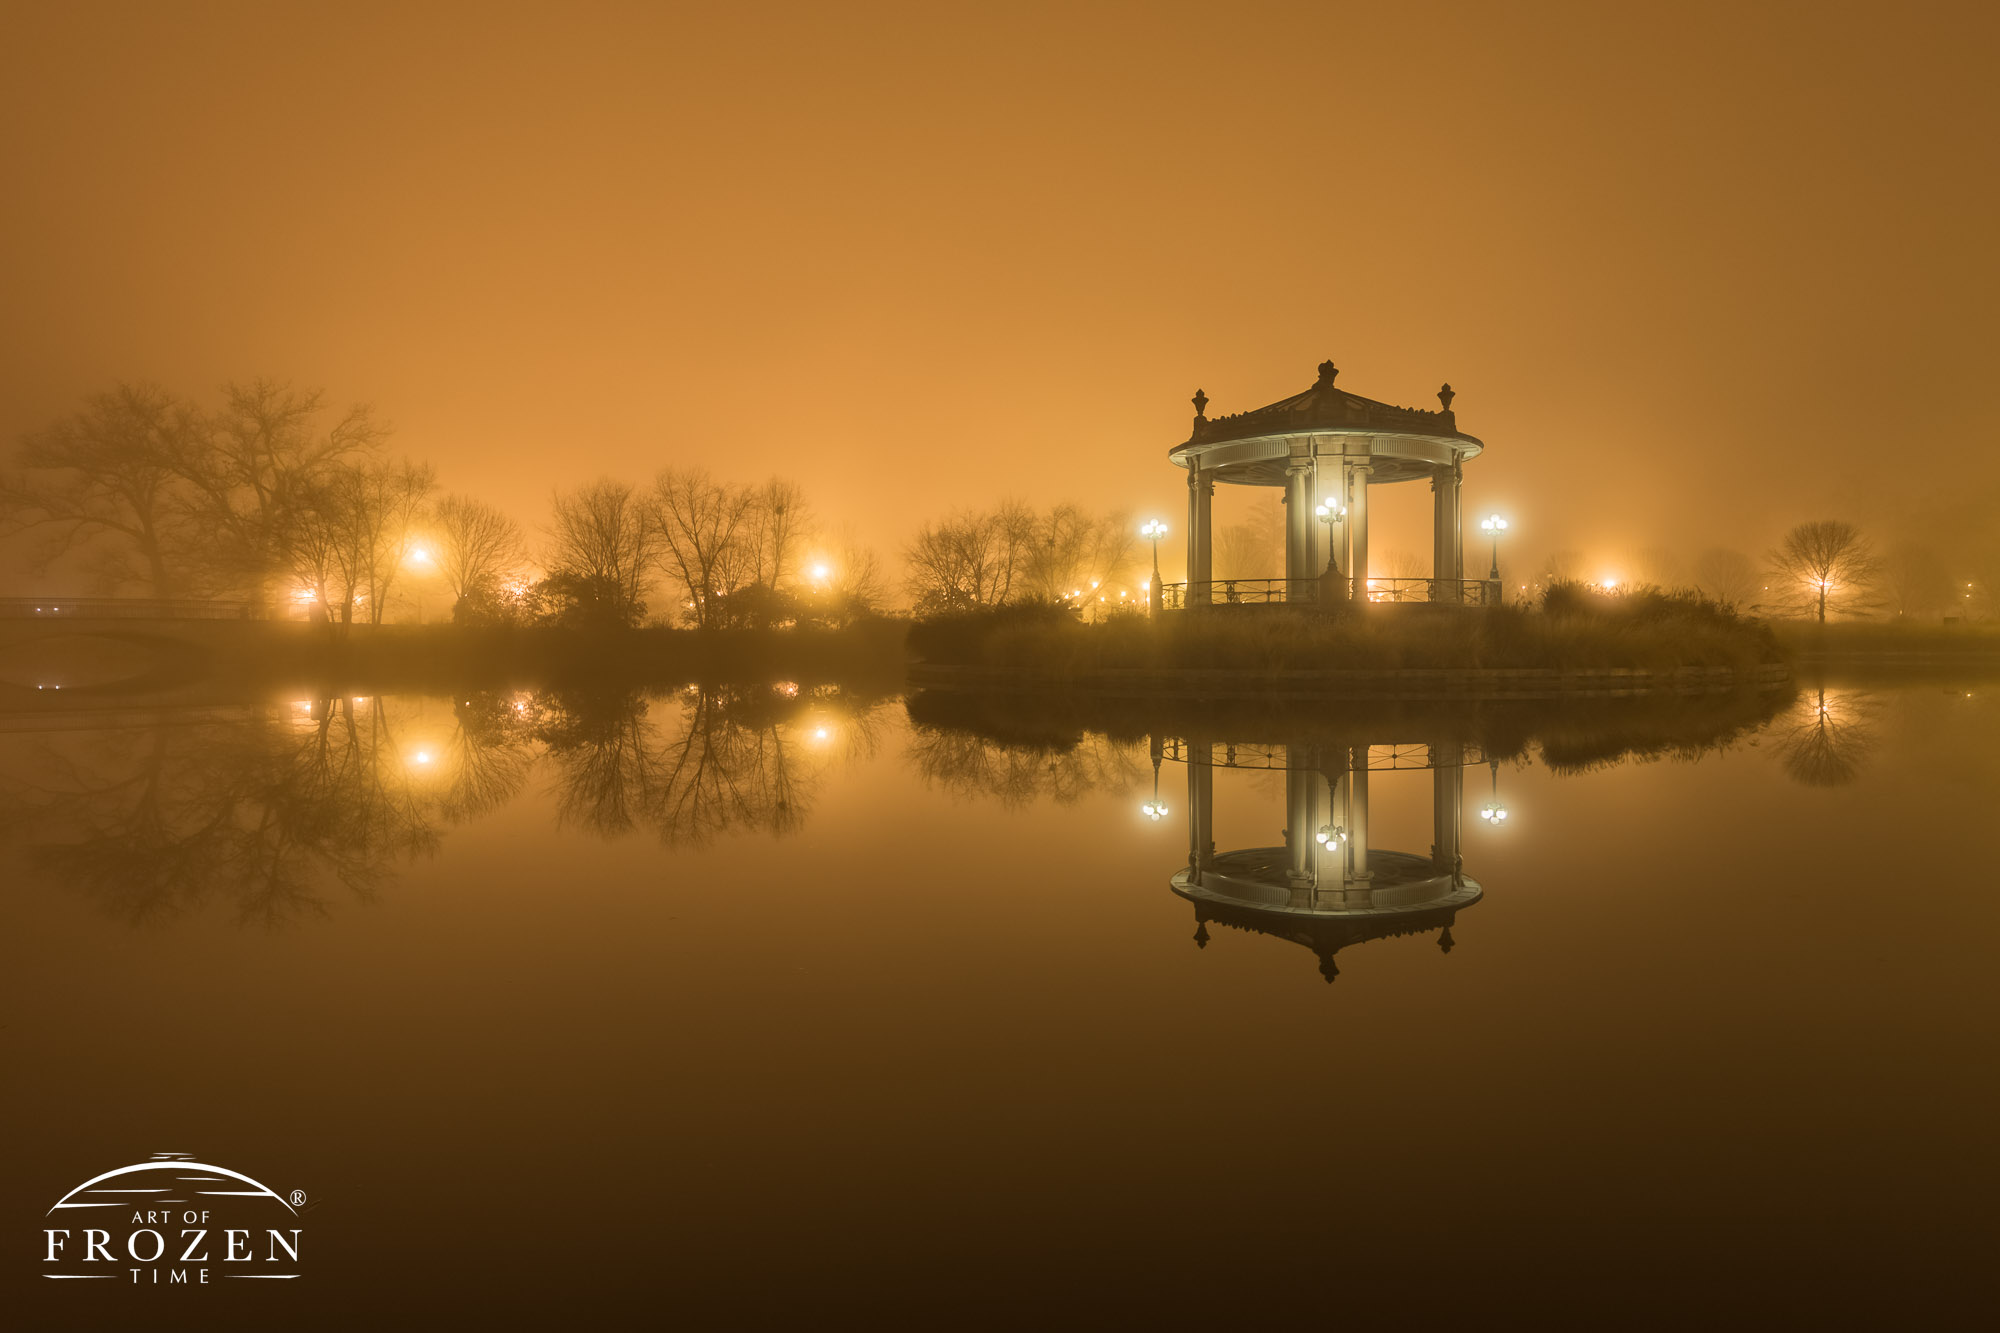 A nighttime heavy fog scene of St Louis Forest Park where parking lighting silhouettes the Nathan Frank Bandstand